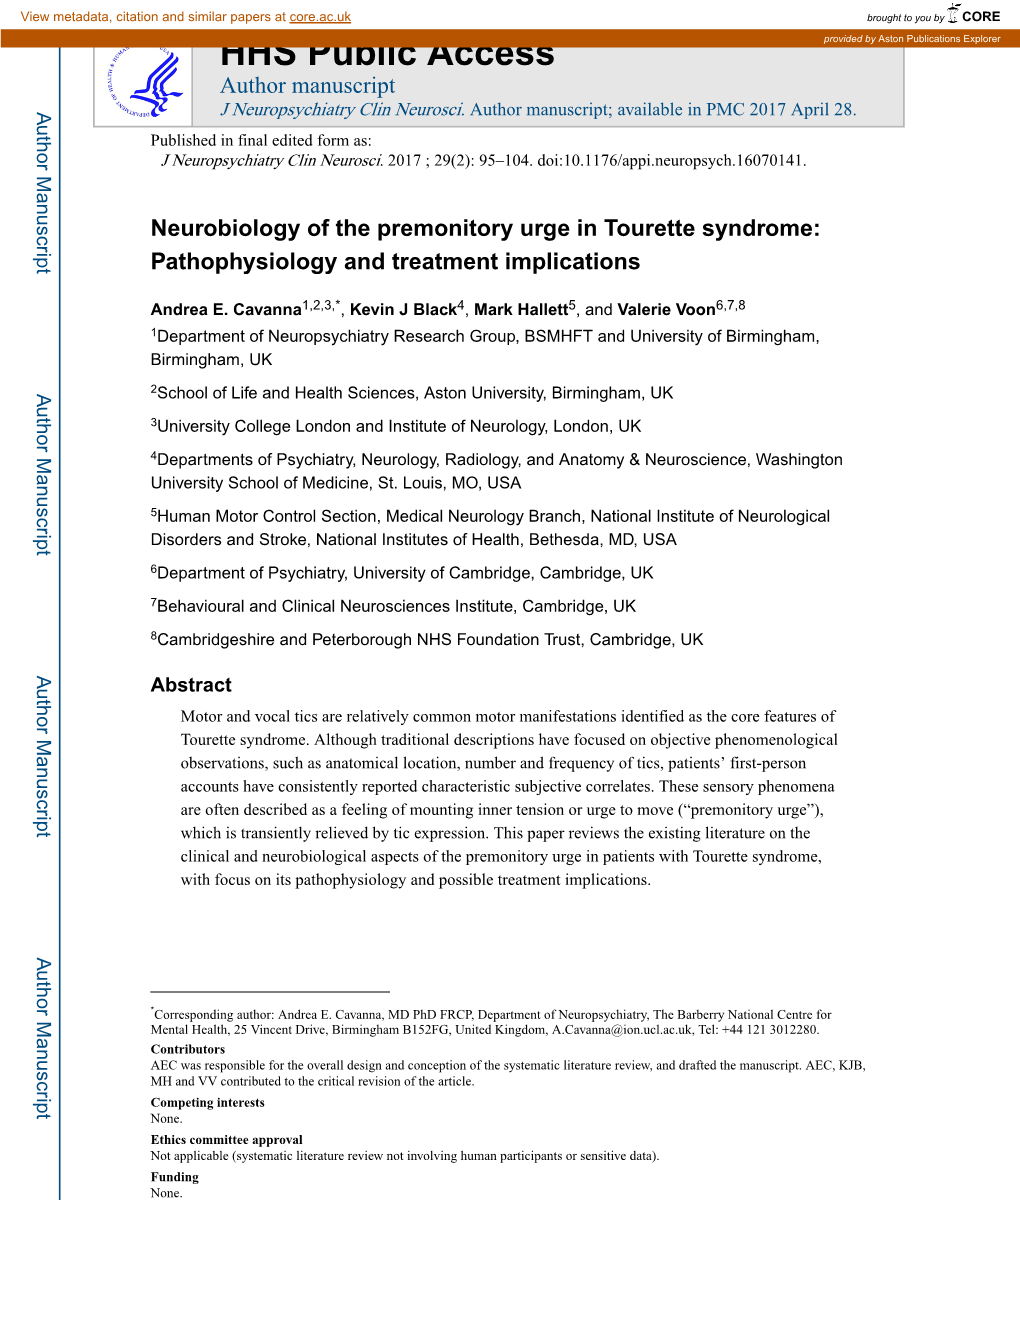 Neurobiology of the Premonitory Urge in Tourette Syndrome: Pathophysiology and Treatment Implications